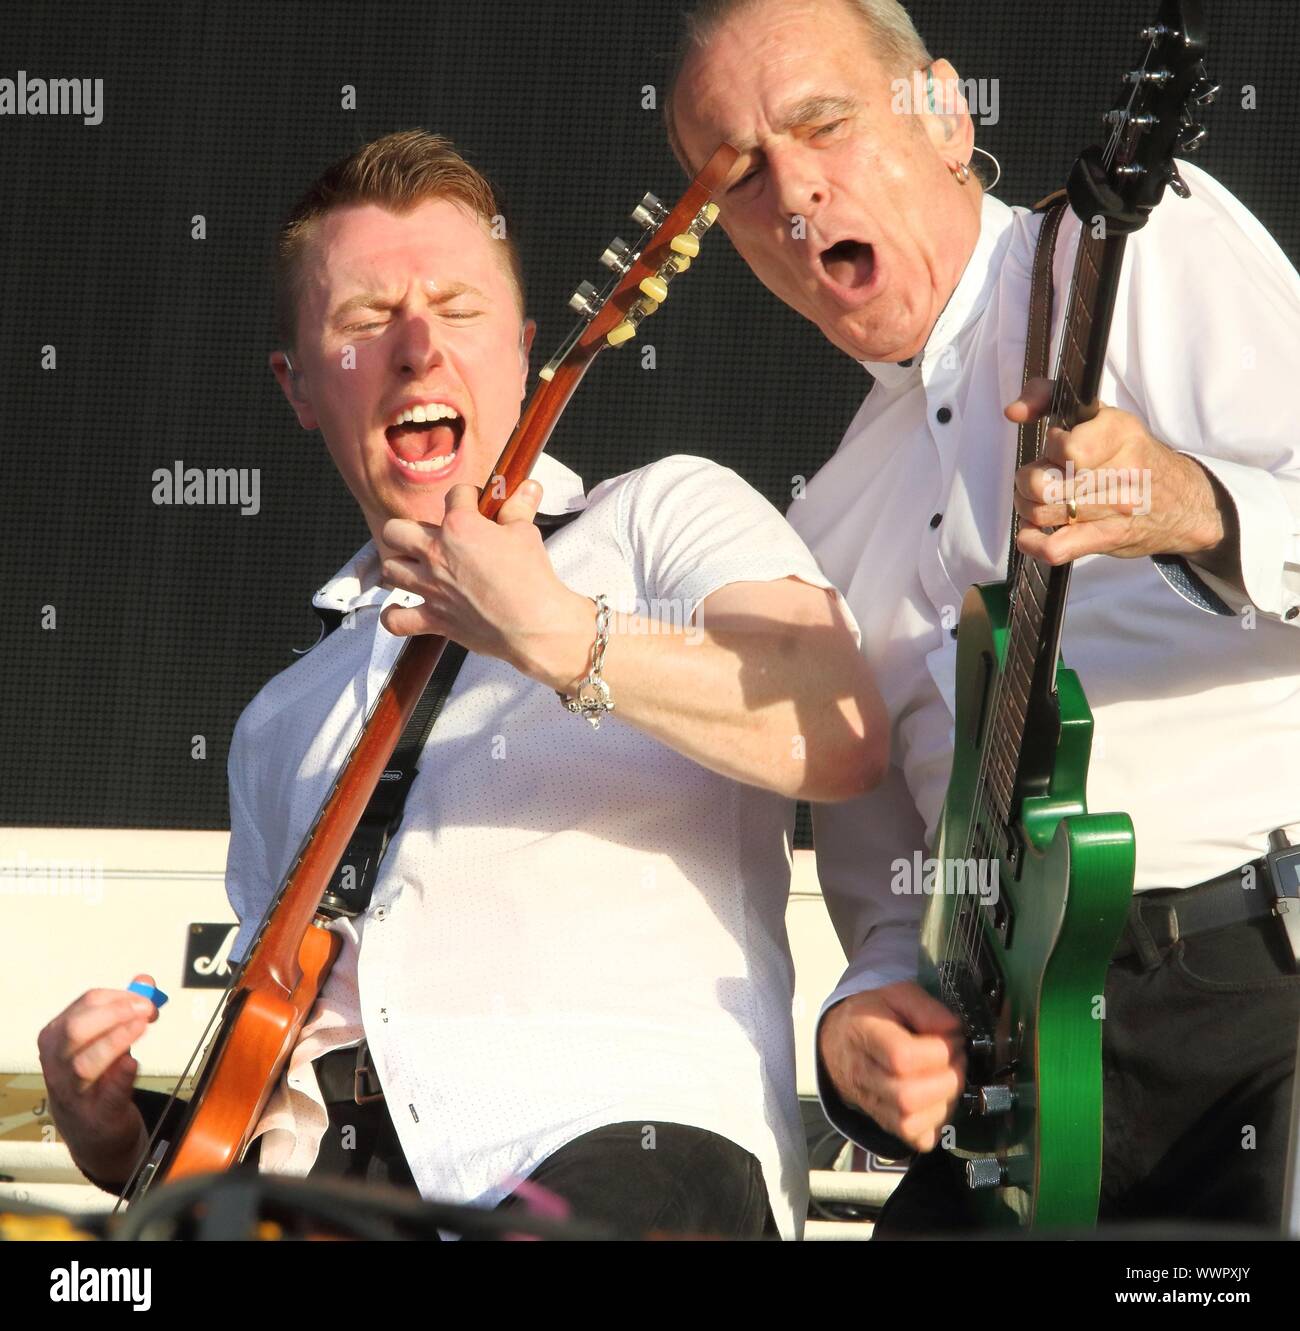 London, UK. 15th Sep, 2019. Richie Malone and Francis Rossi of Status Quo English  Rock band perform live on stage at the BBC Radio 2 Live in Hyde Park,  London. Credit: SOPA